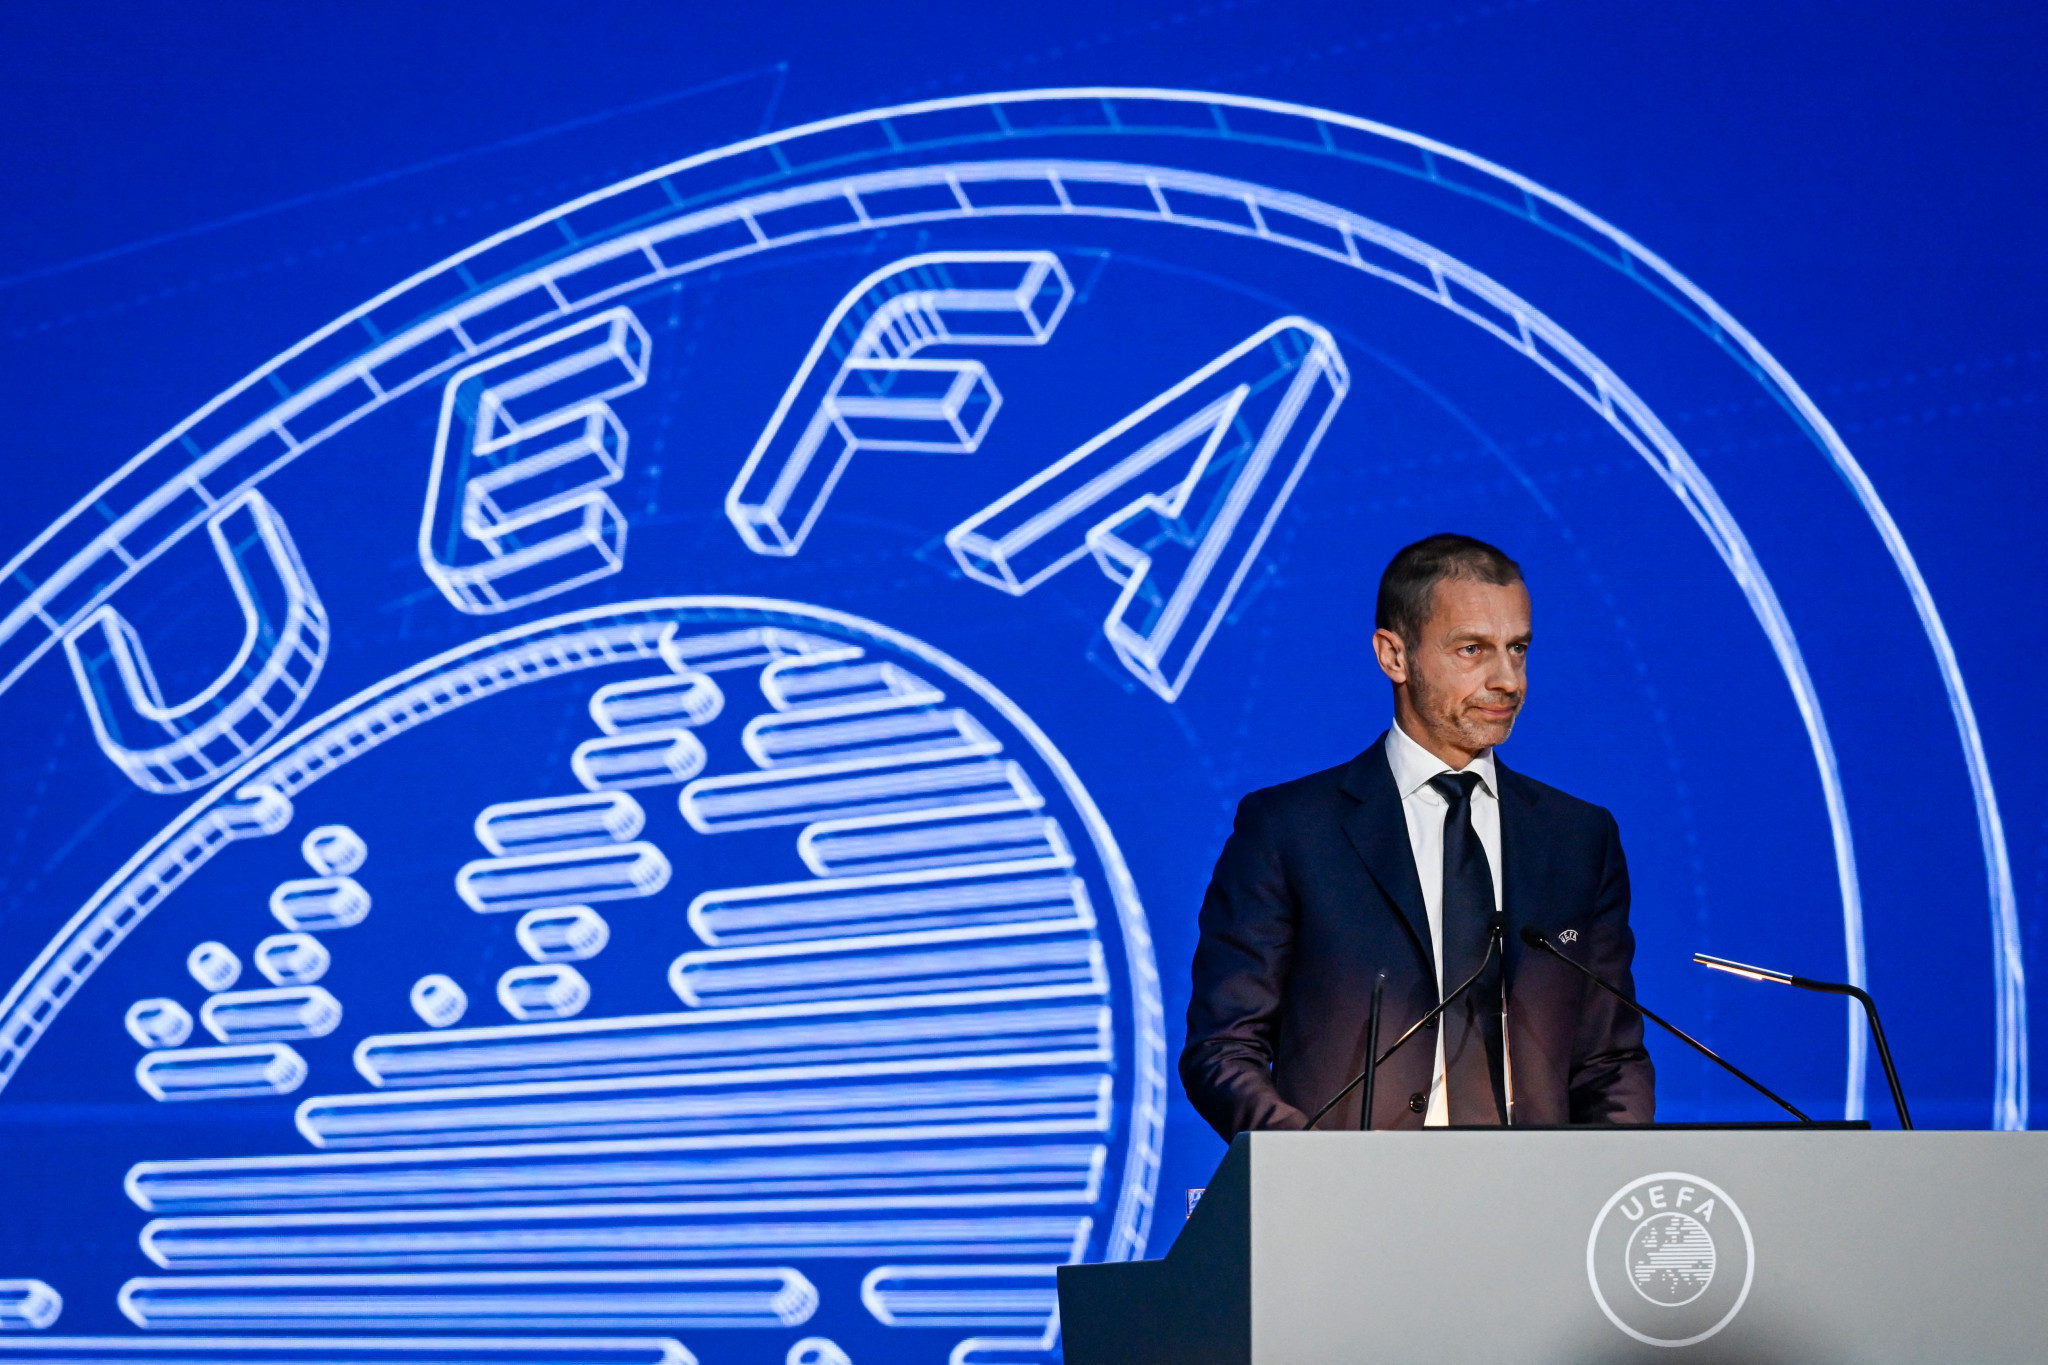 UEFA's newly re-elected President Aleksander Ceferin says the question of whether Belarus will join Russia in being banned will be discussed at the next Executive Board meeting on June 28 ©Getty Images